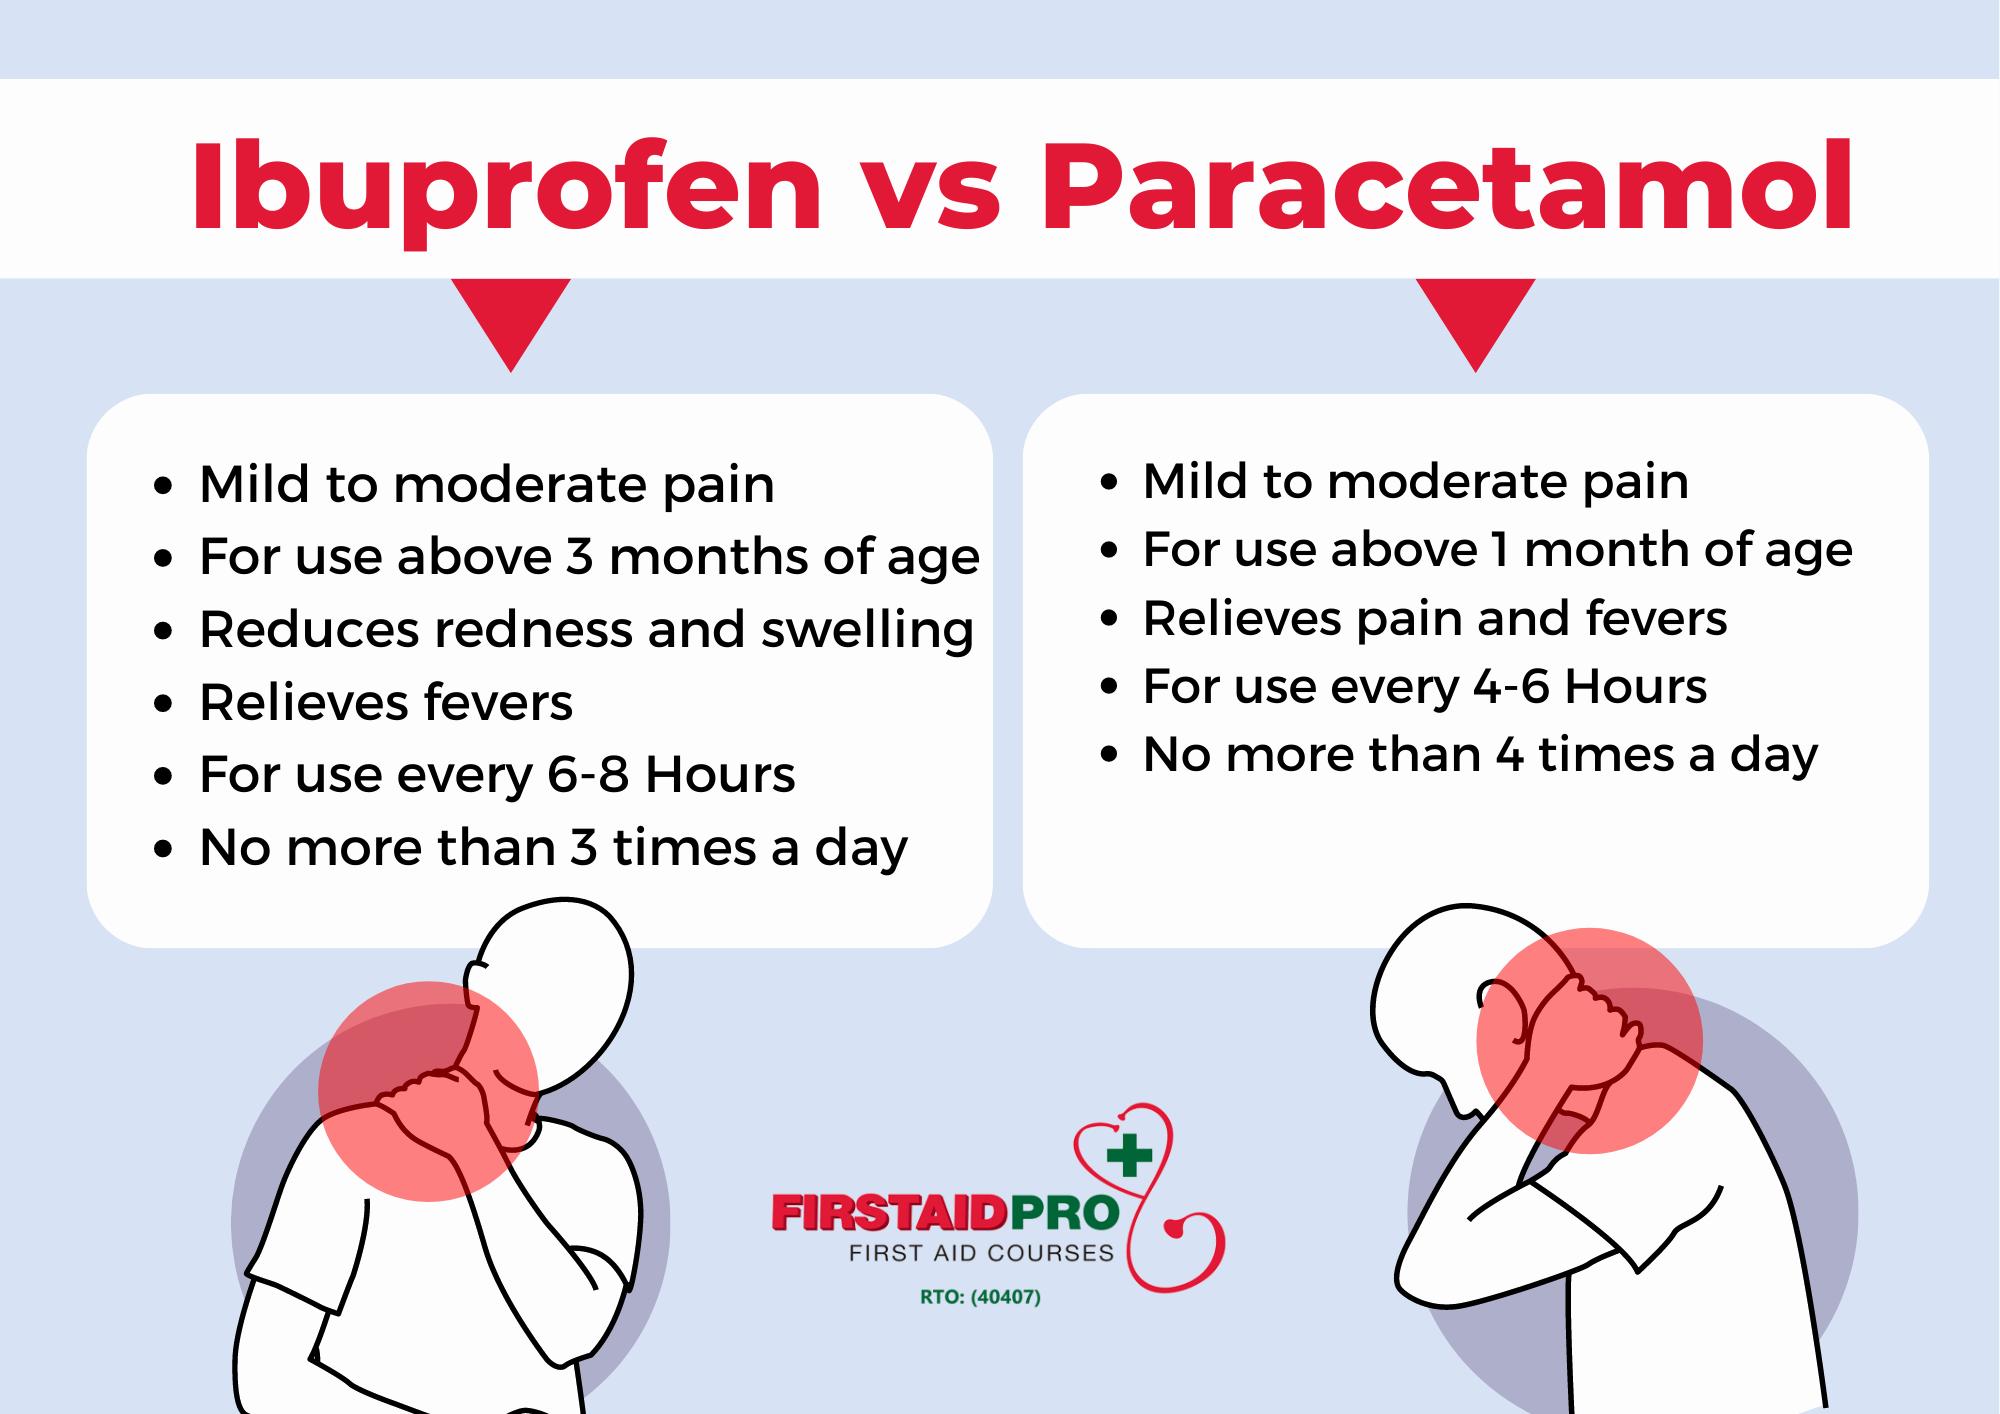 A comparison of ibuprofen and paracetamol, including information on when each should be used and their side effects.